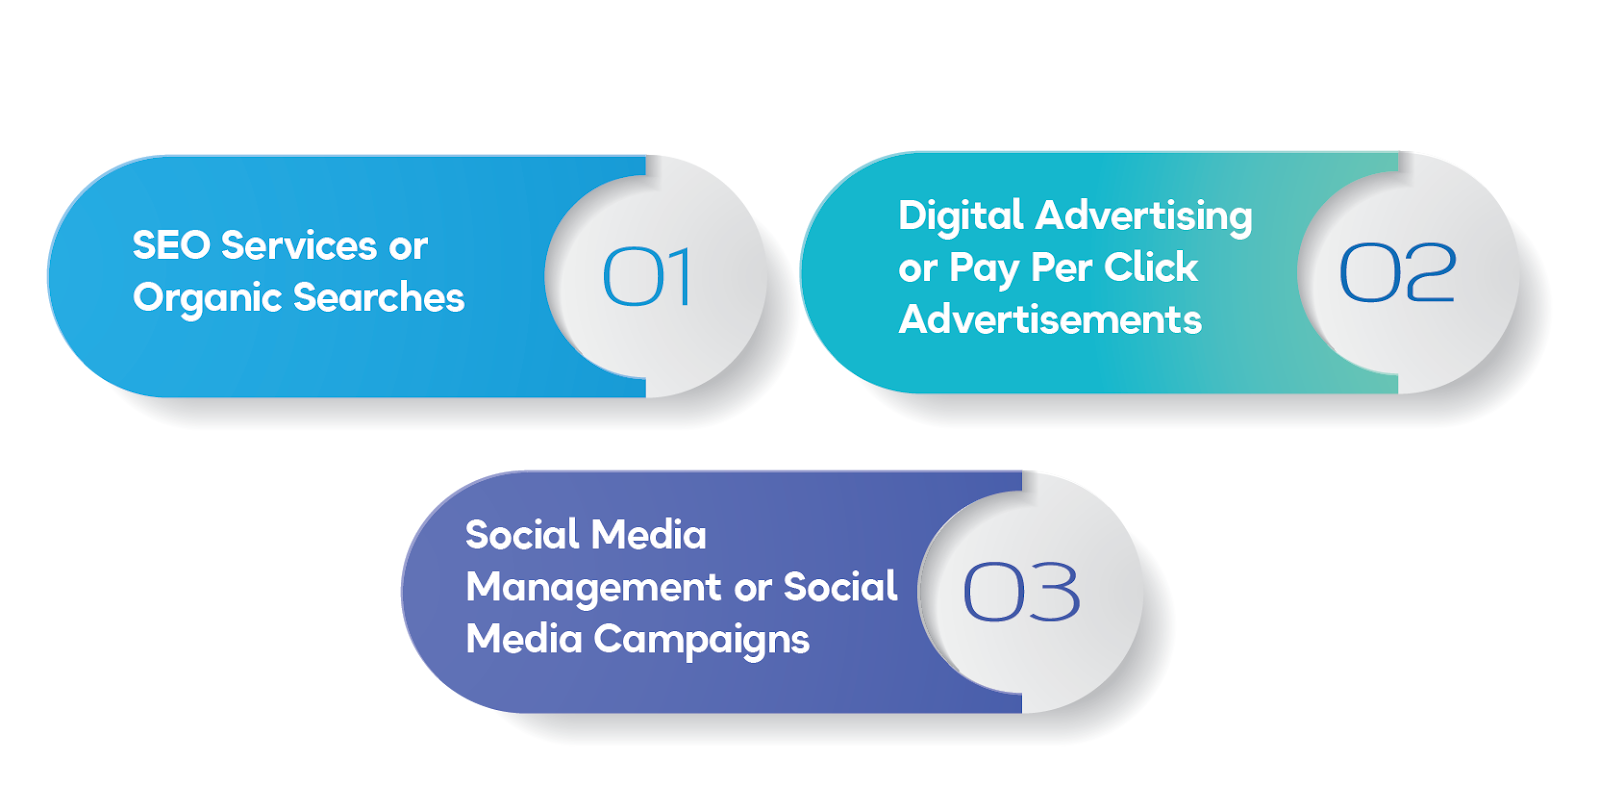 What Includes in Digital Marketing Services